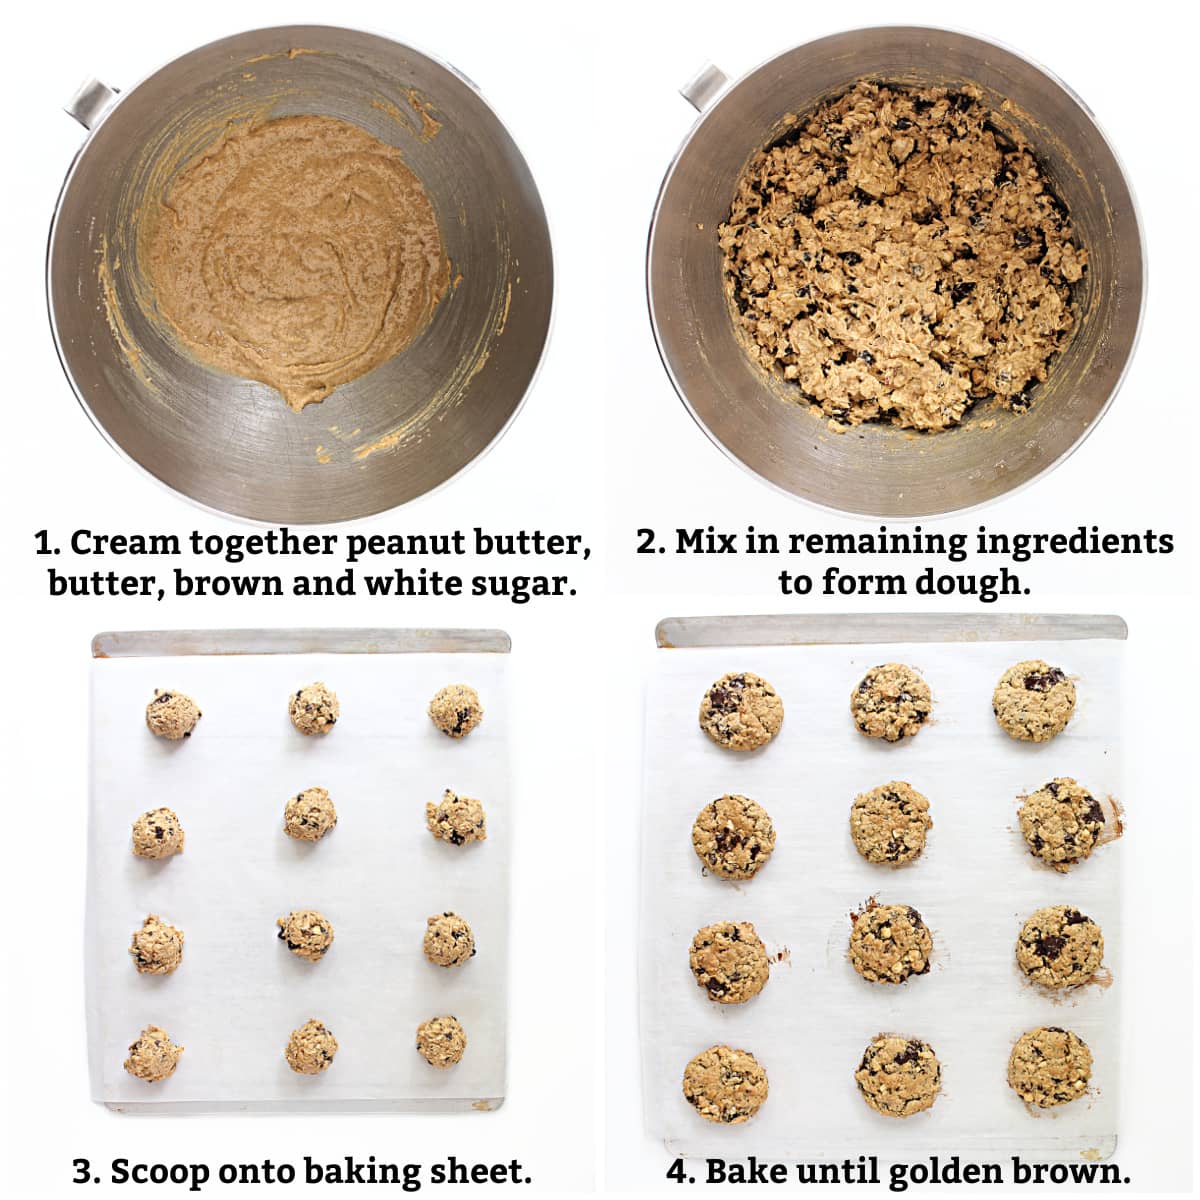 Instructions: cream butter, peanut butter, and sugars, Mix in remaining ingredients, scoop, bake.